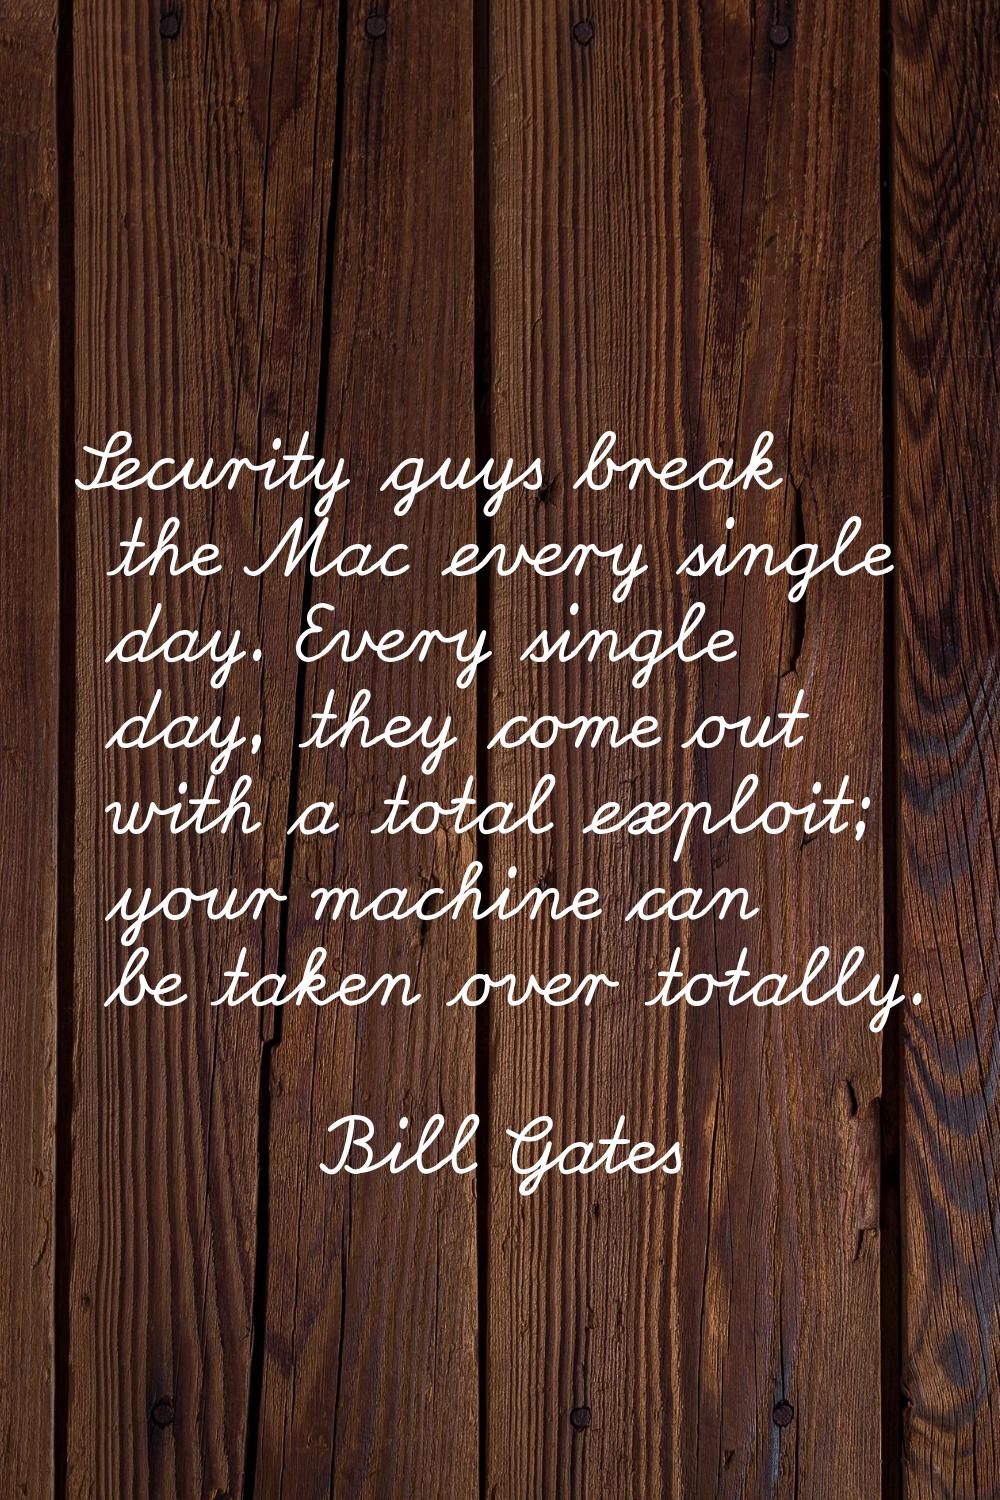 Security guys break the Mac every single day. Every single day, they come out with a total exploit;